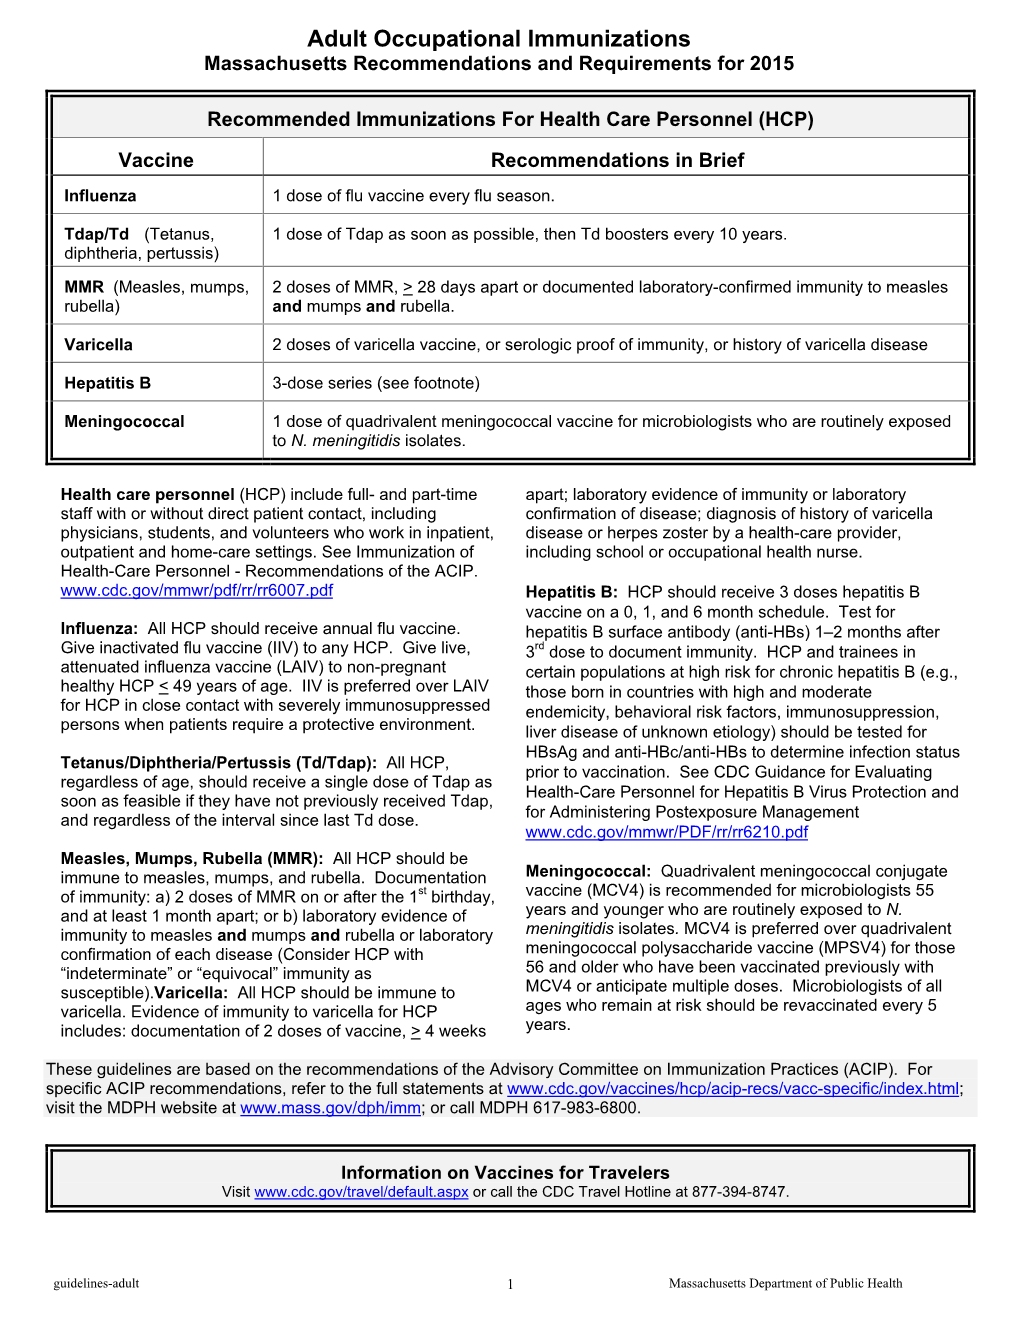 Adult Occupational Immunizations Massachusetts Recommendations and Requirements for 2015